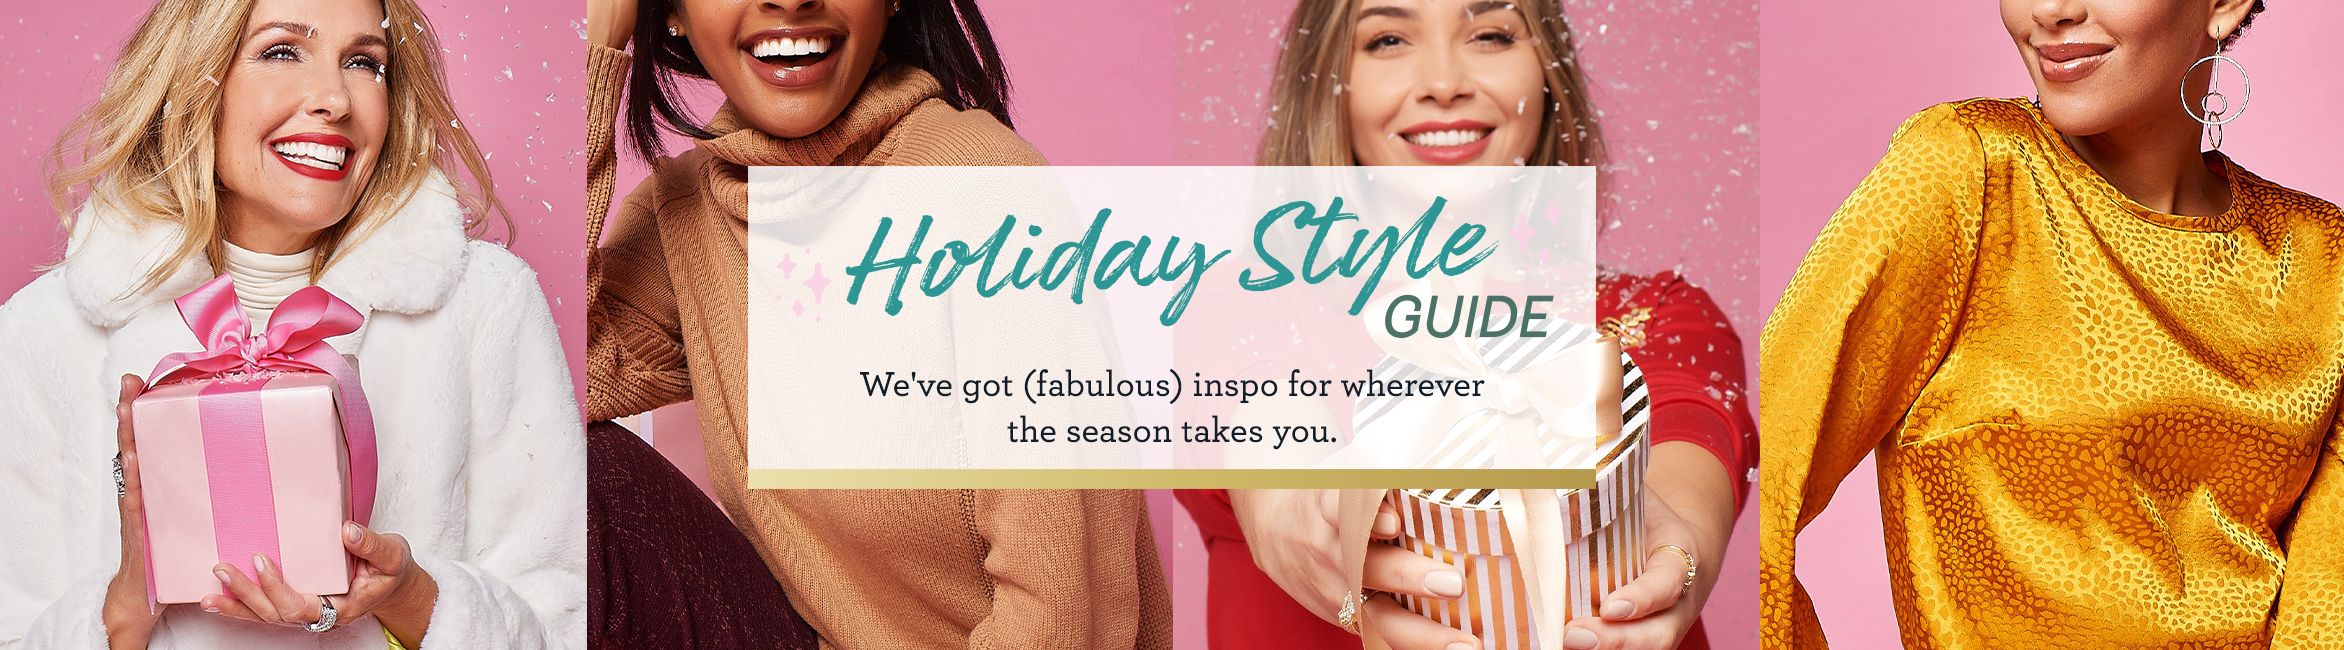 Holiday Style Guide     We've got (fabulous) inspo for wherever the season takes you.